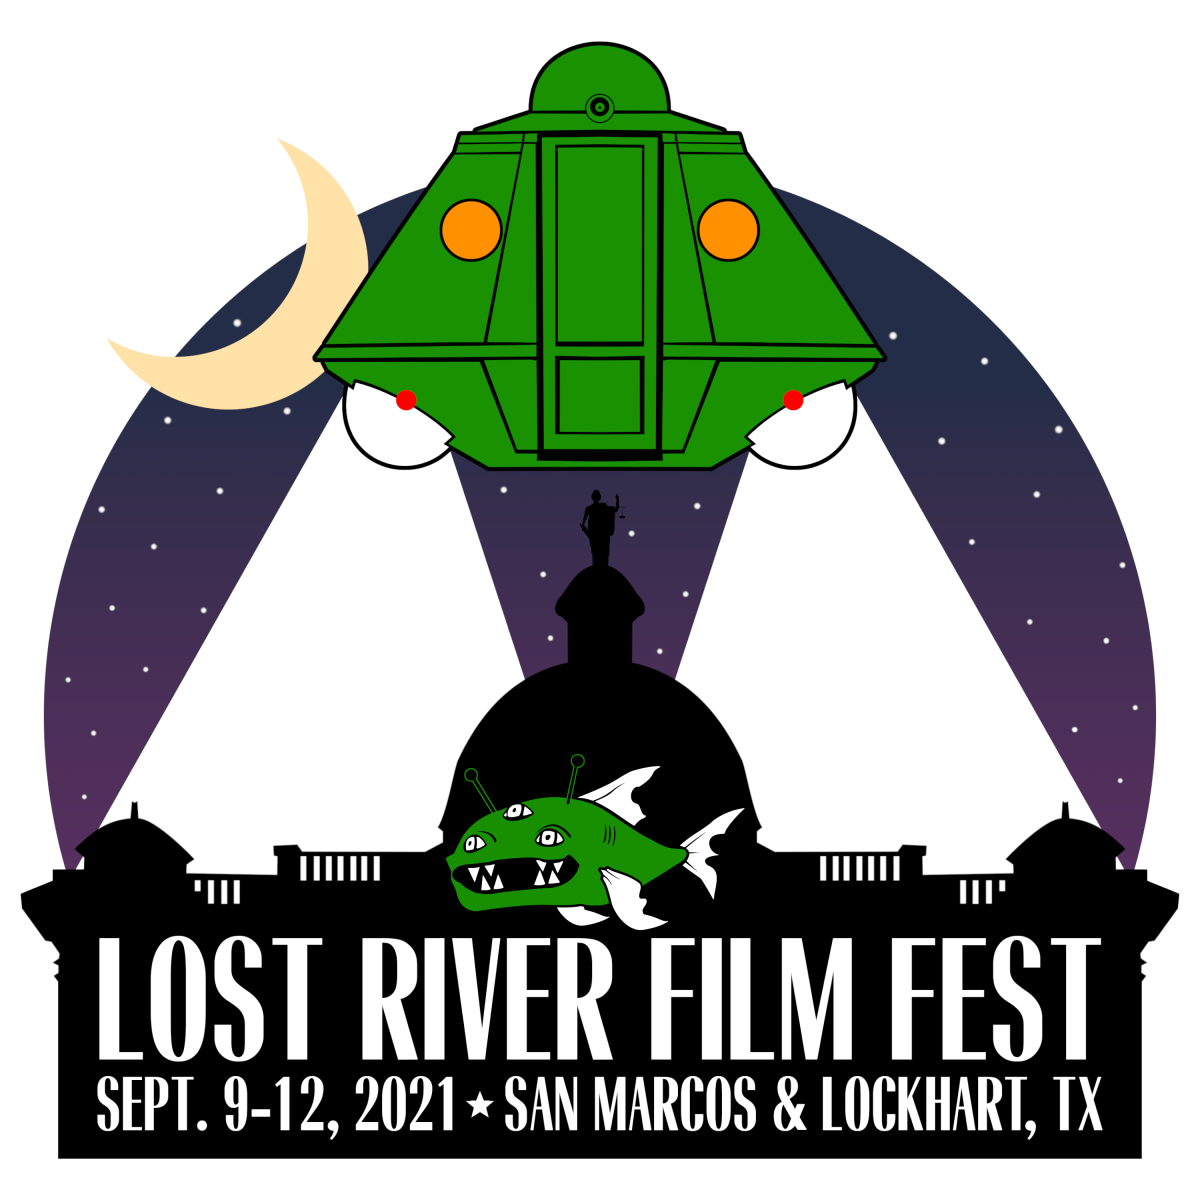 This years Lost River Film Fest will take place from Sept. 9-12 in San Marcos and Lockhart, Texas.